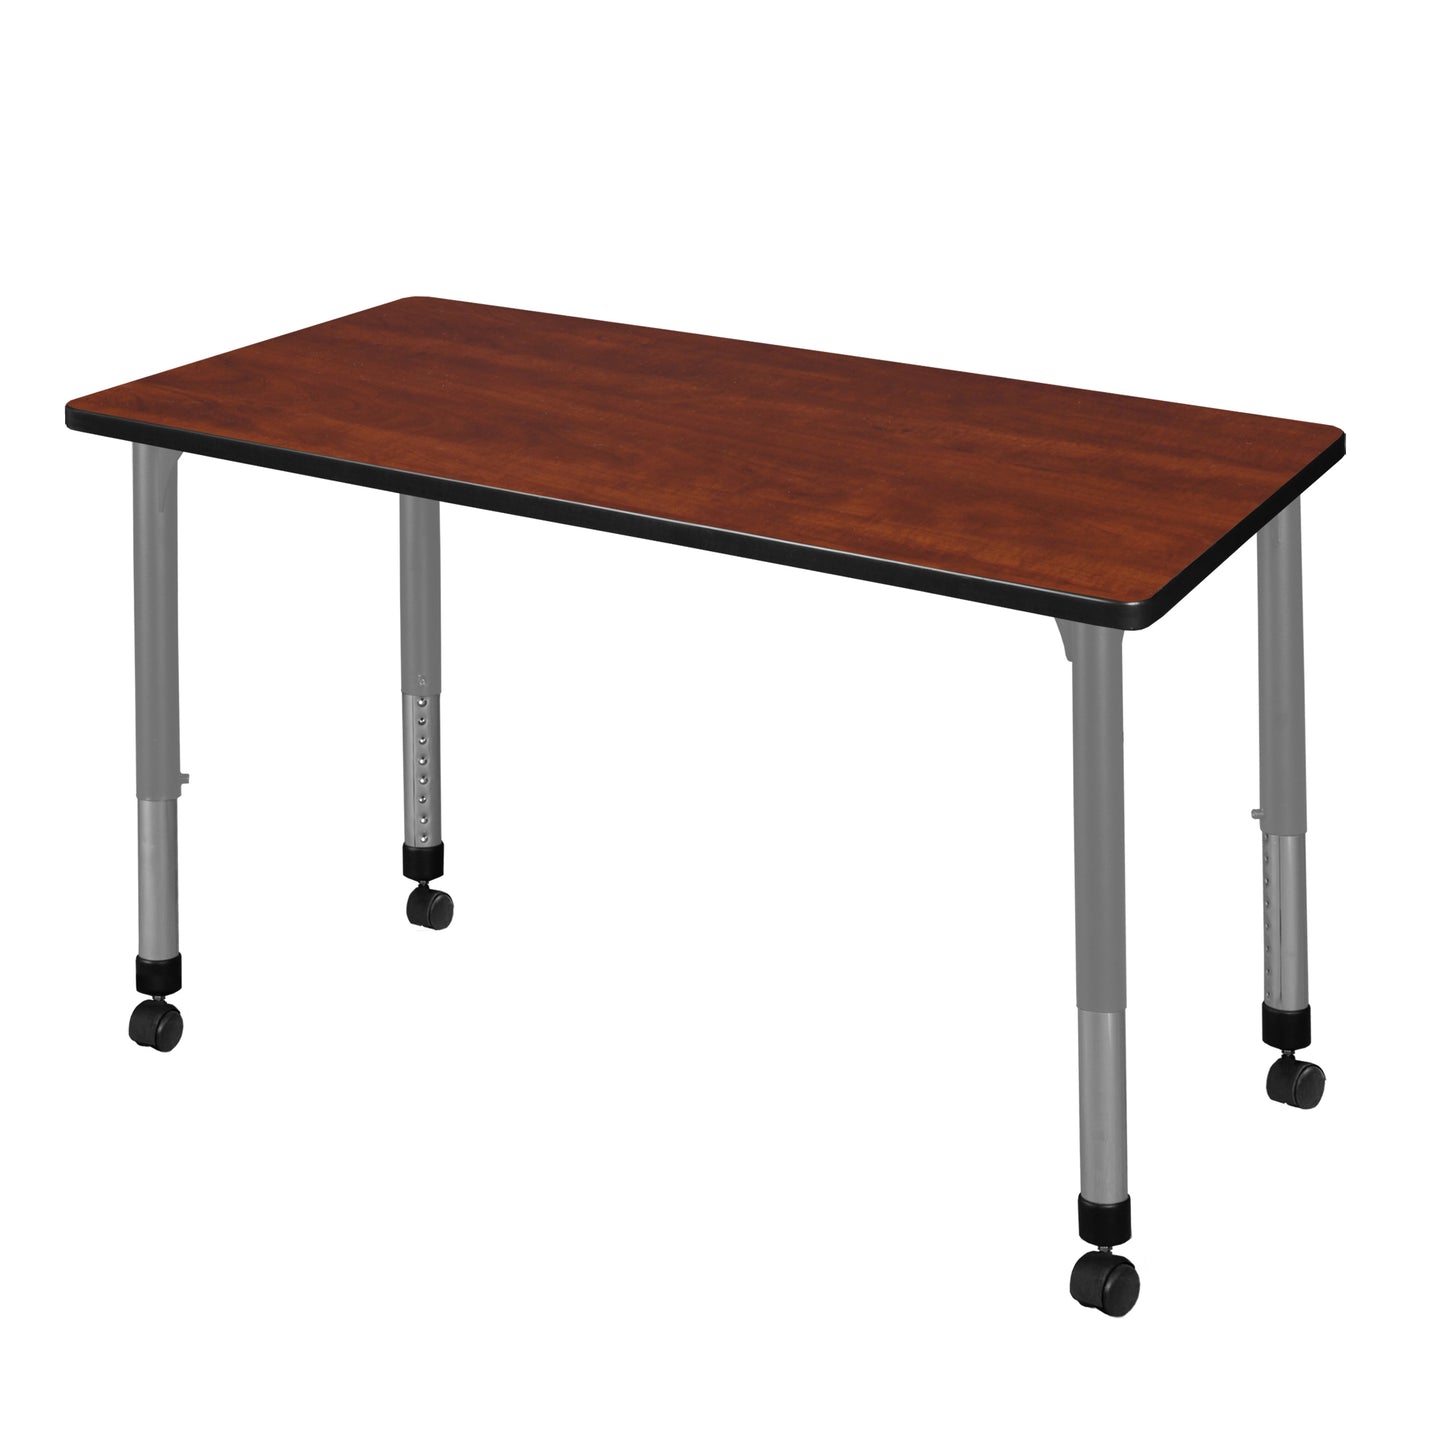 Regency Kee 48 x 24 in. Height Adjustable Mobile Classroom Activity Table